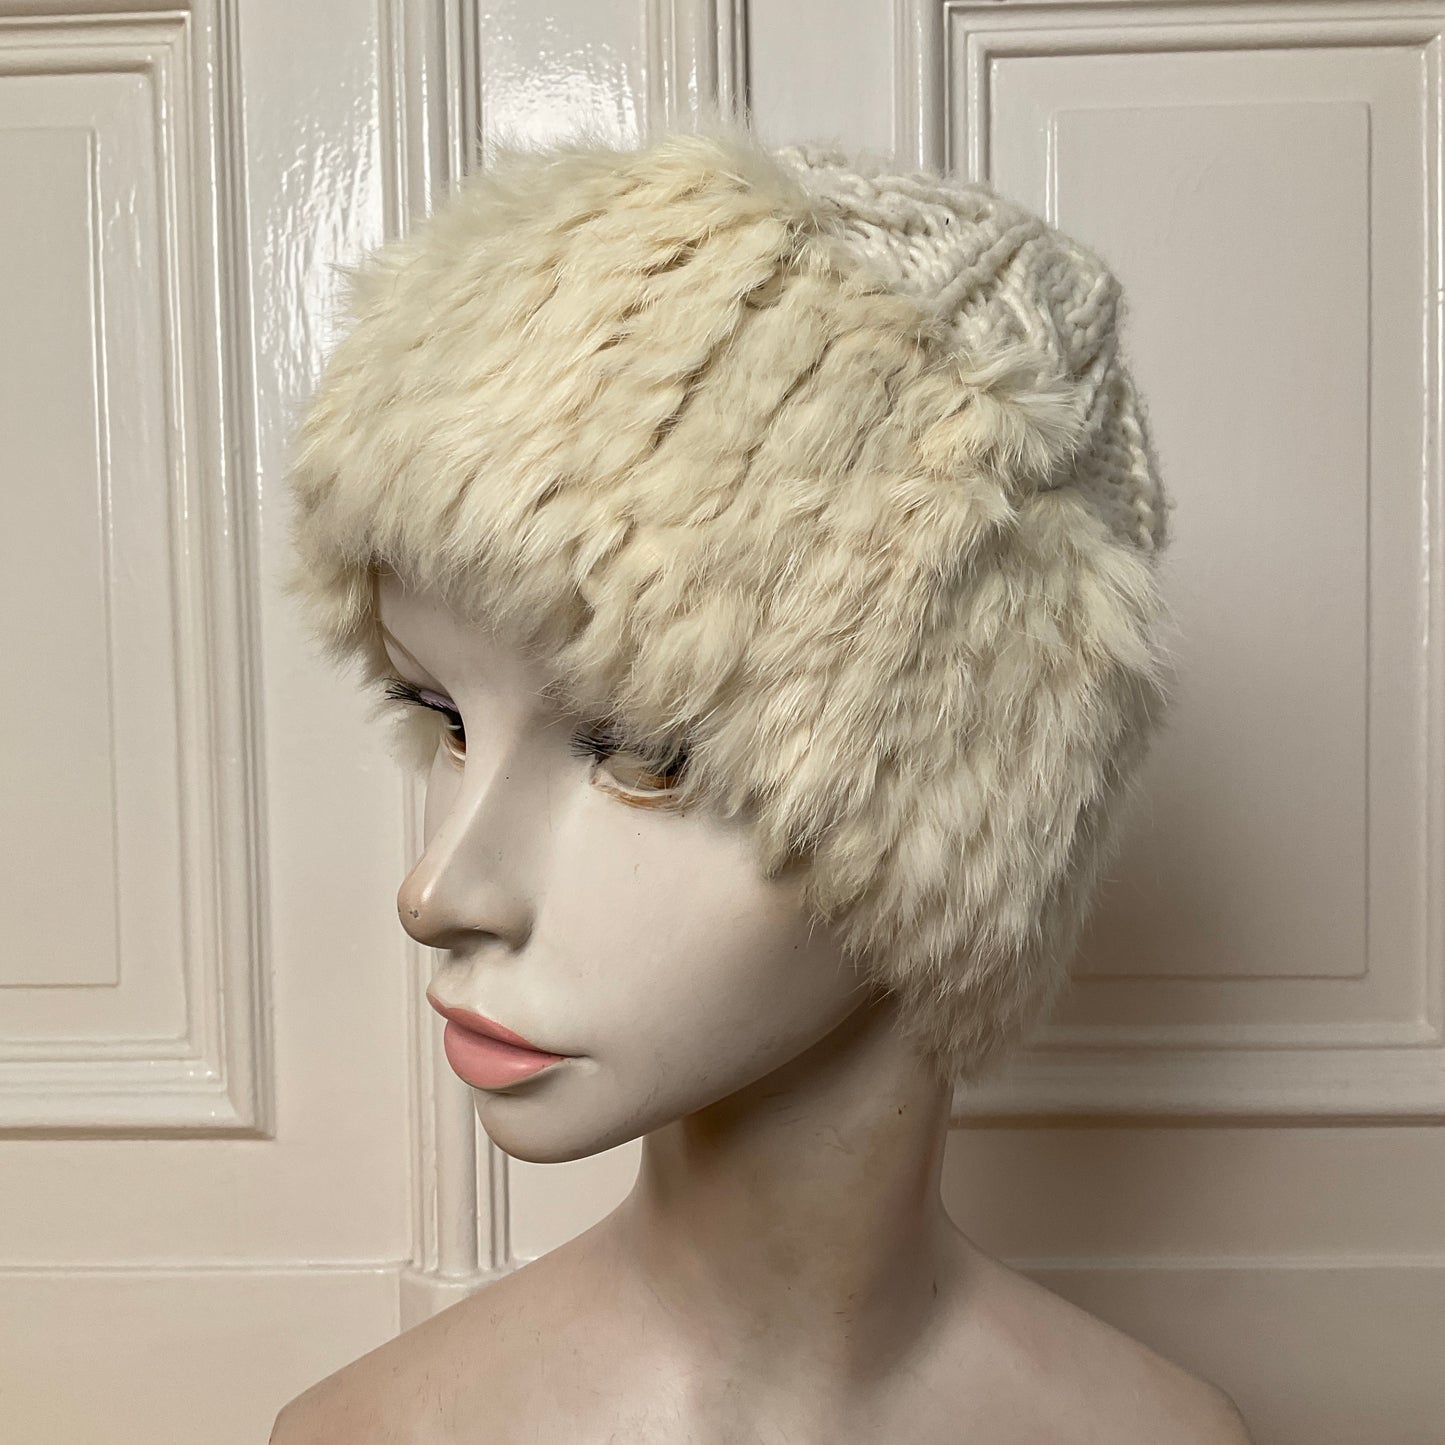 Cute knit wool hat with fur